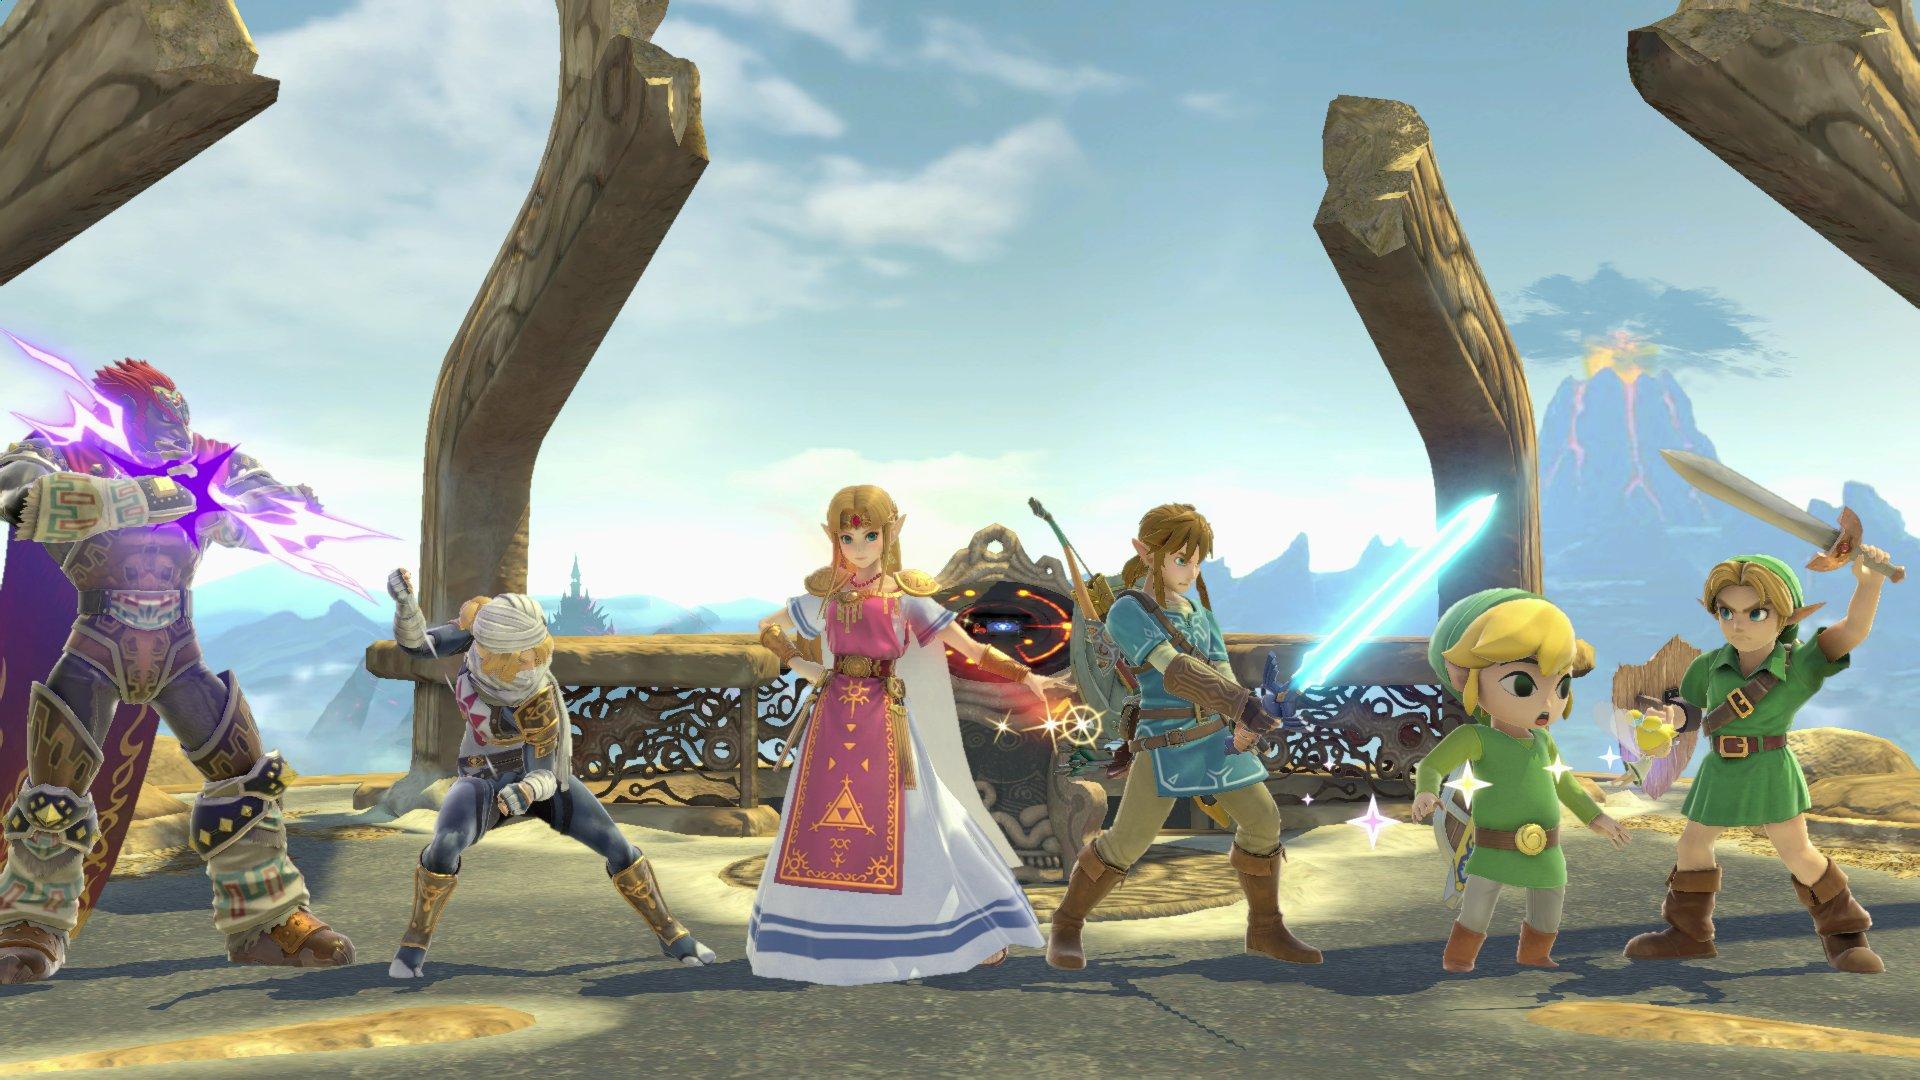 Smash Ultimate- Love this shot, especially Young Link and Ganondorf